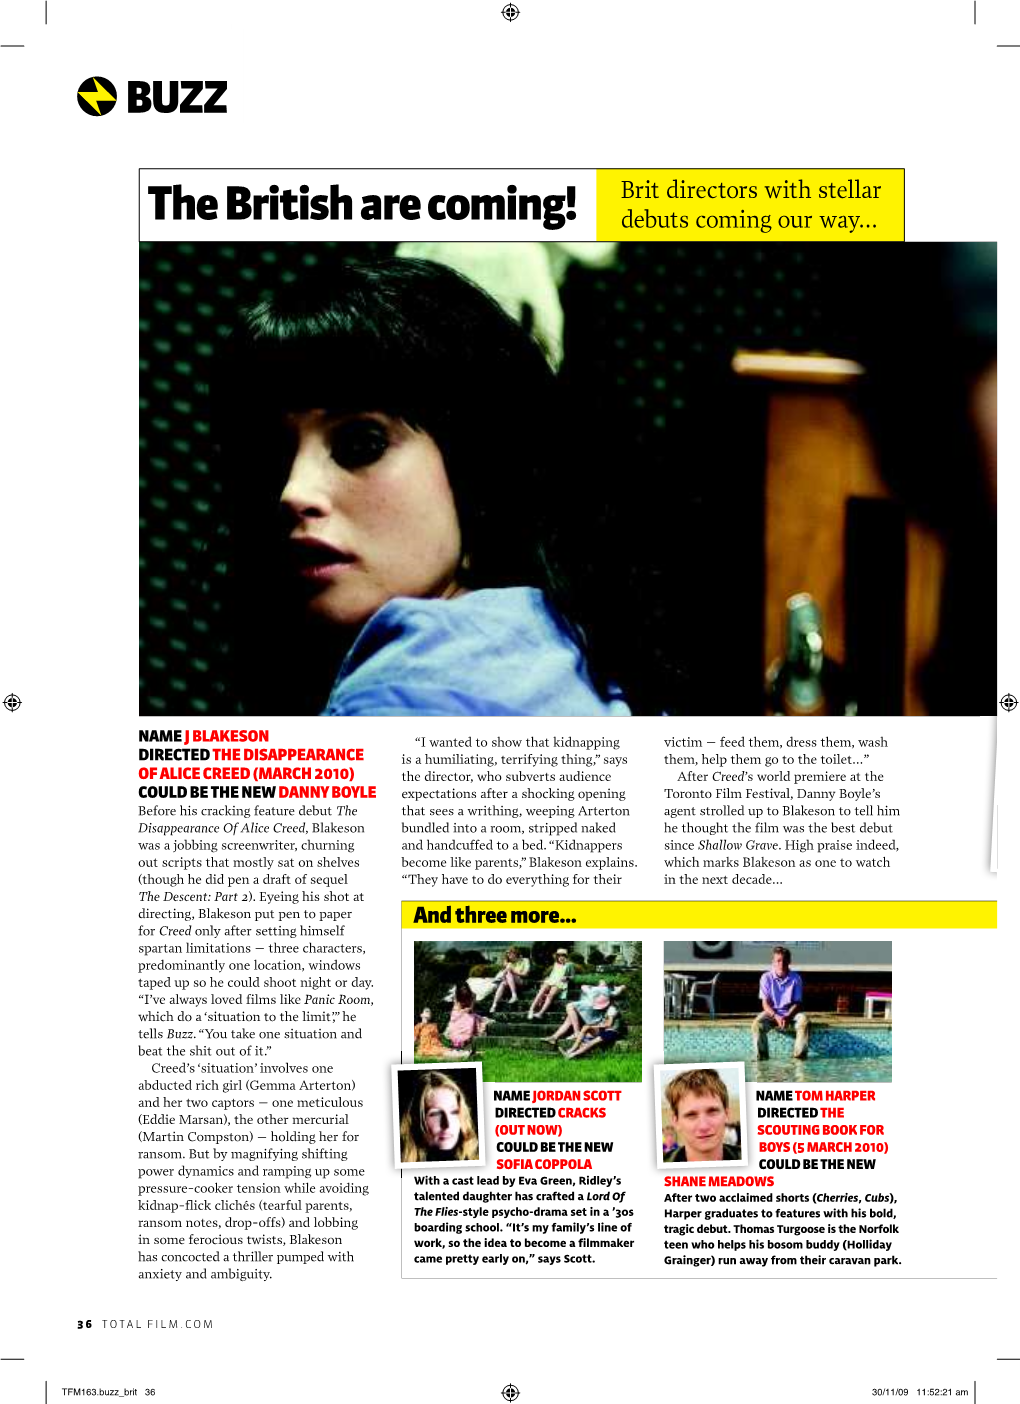 The British Are Coming! Debuts Coming Our Way…